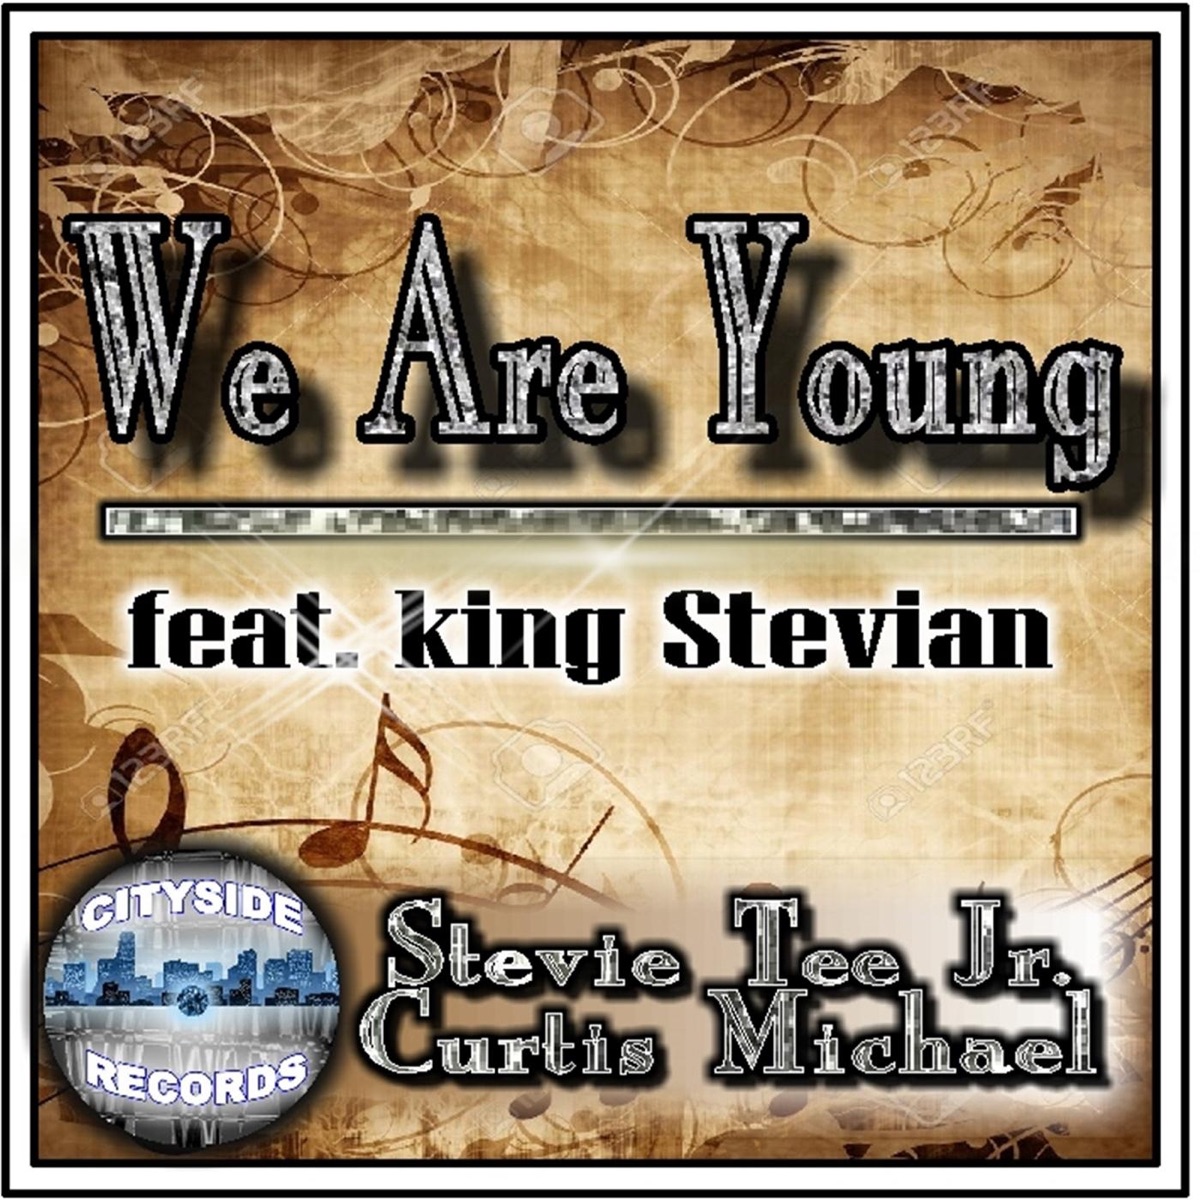 You Are My Queen I Am Your King - song and lyrics by Empanaya, D.J. Stevie  Tee, King Yjay